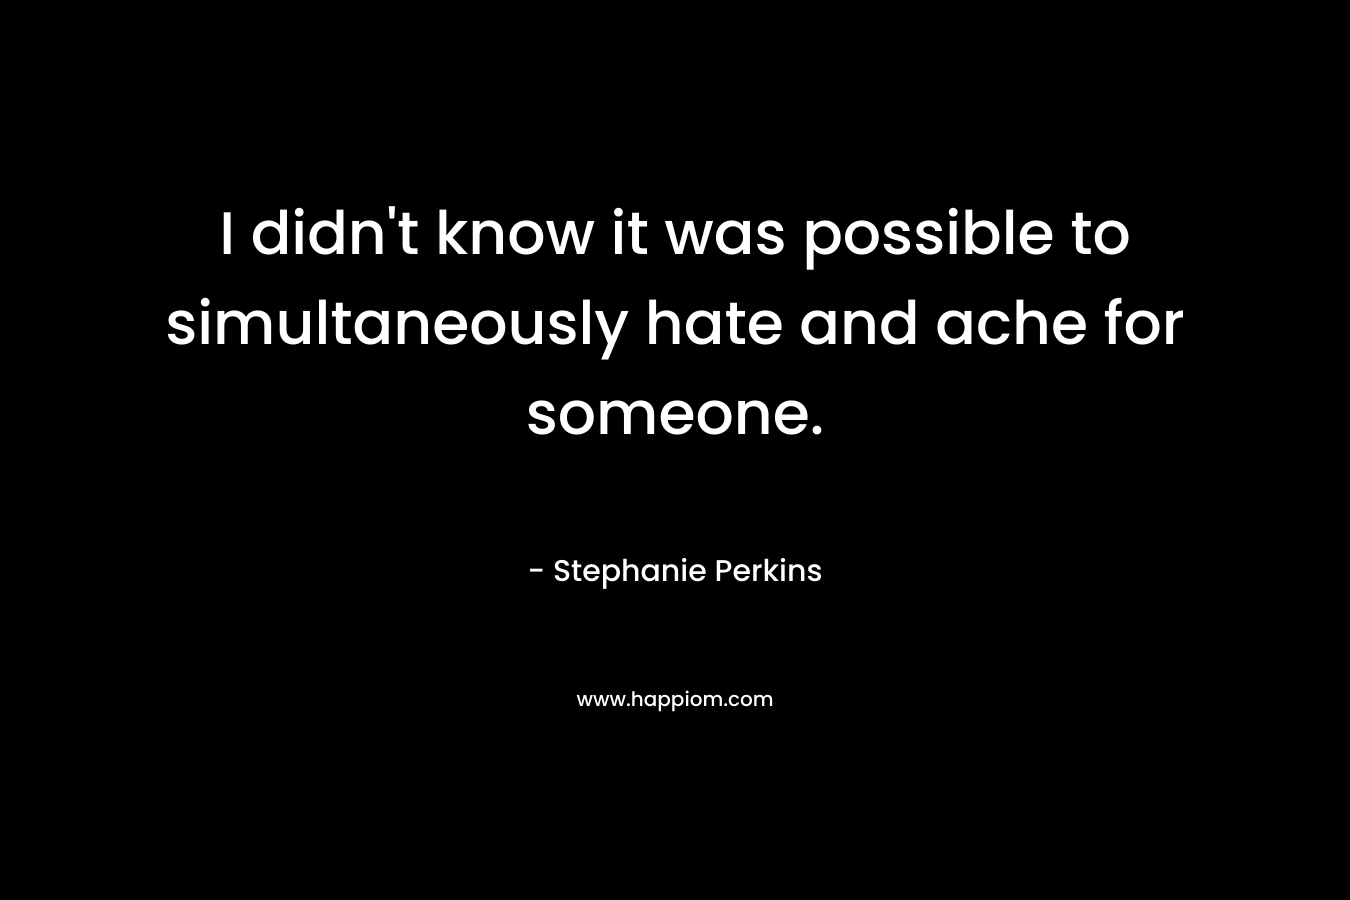 I didn’t know it was possible to simultaneously hate and ache for someone. – Stephanie Perkins